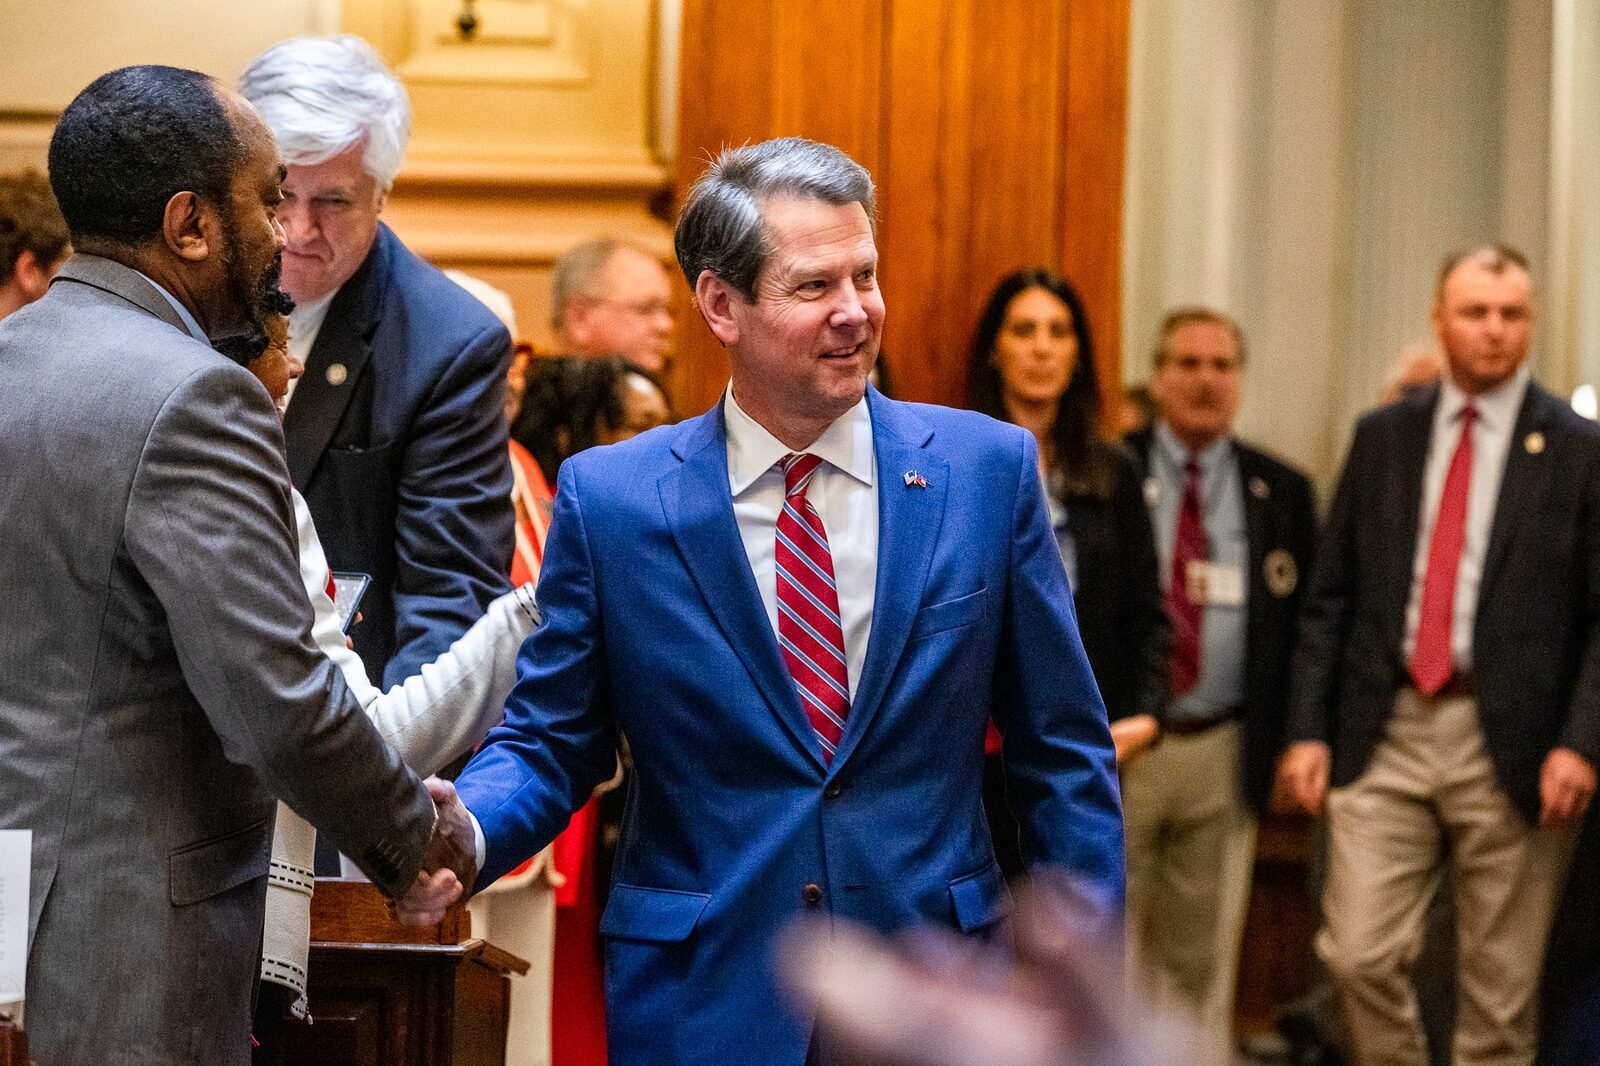 Find out what Brian Kemp said during his State of the State address